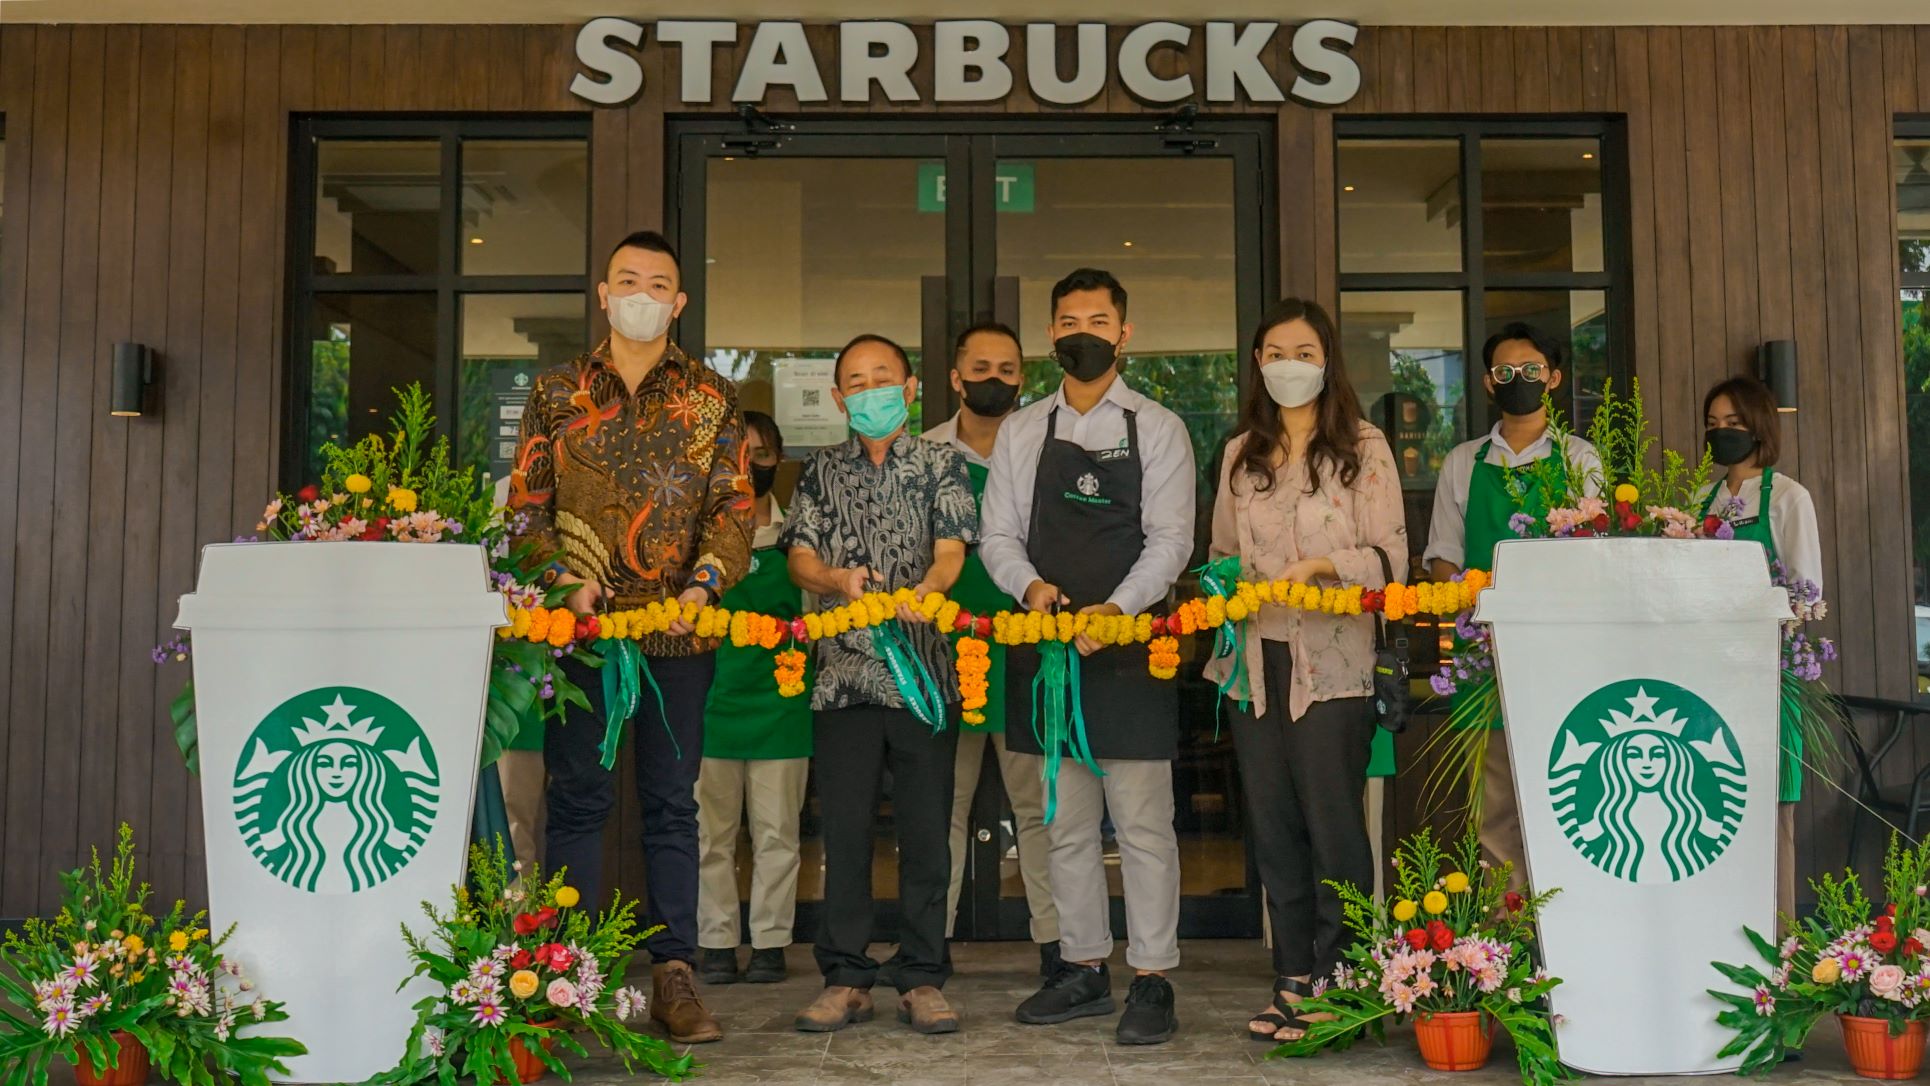 Starbucks Greets Customers with Its First Stores in  Madiun and Kediri, Indonesia